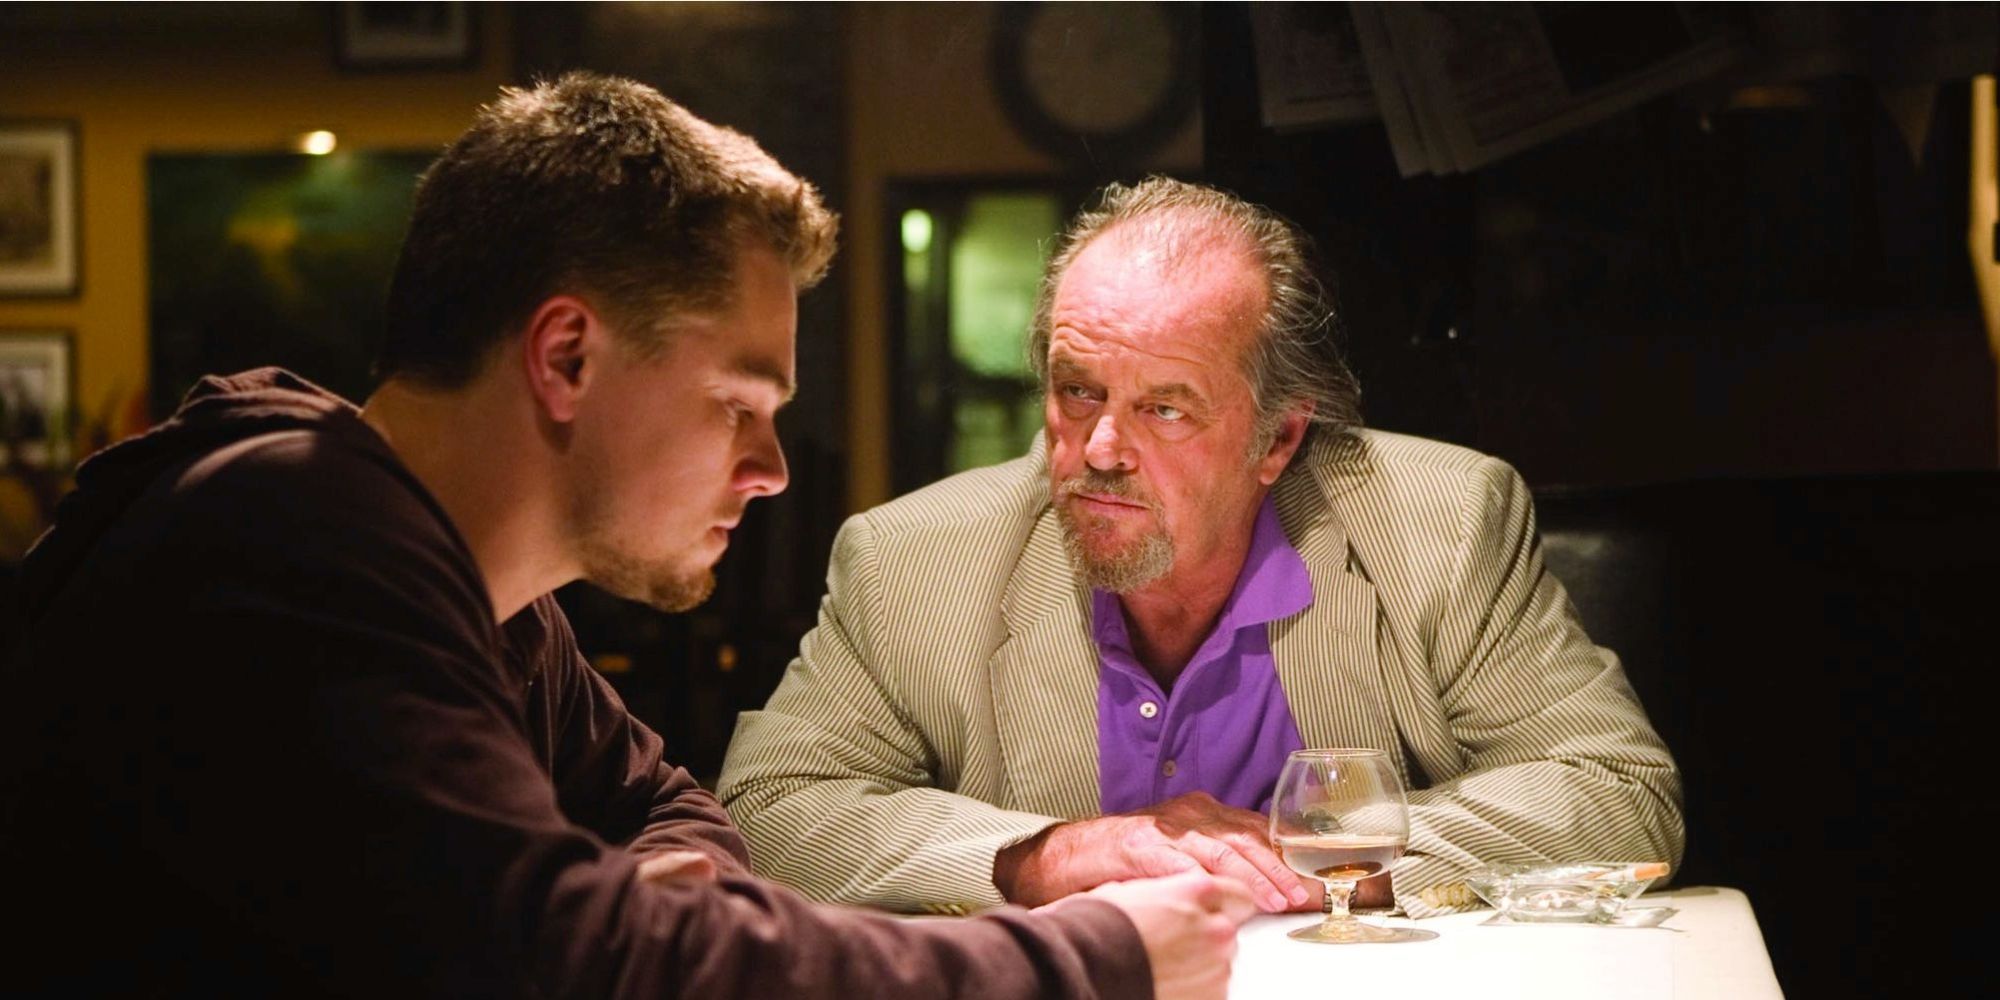 Leonardo DiCaprio and Jack Nicholson having a conversation in The Departed